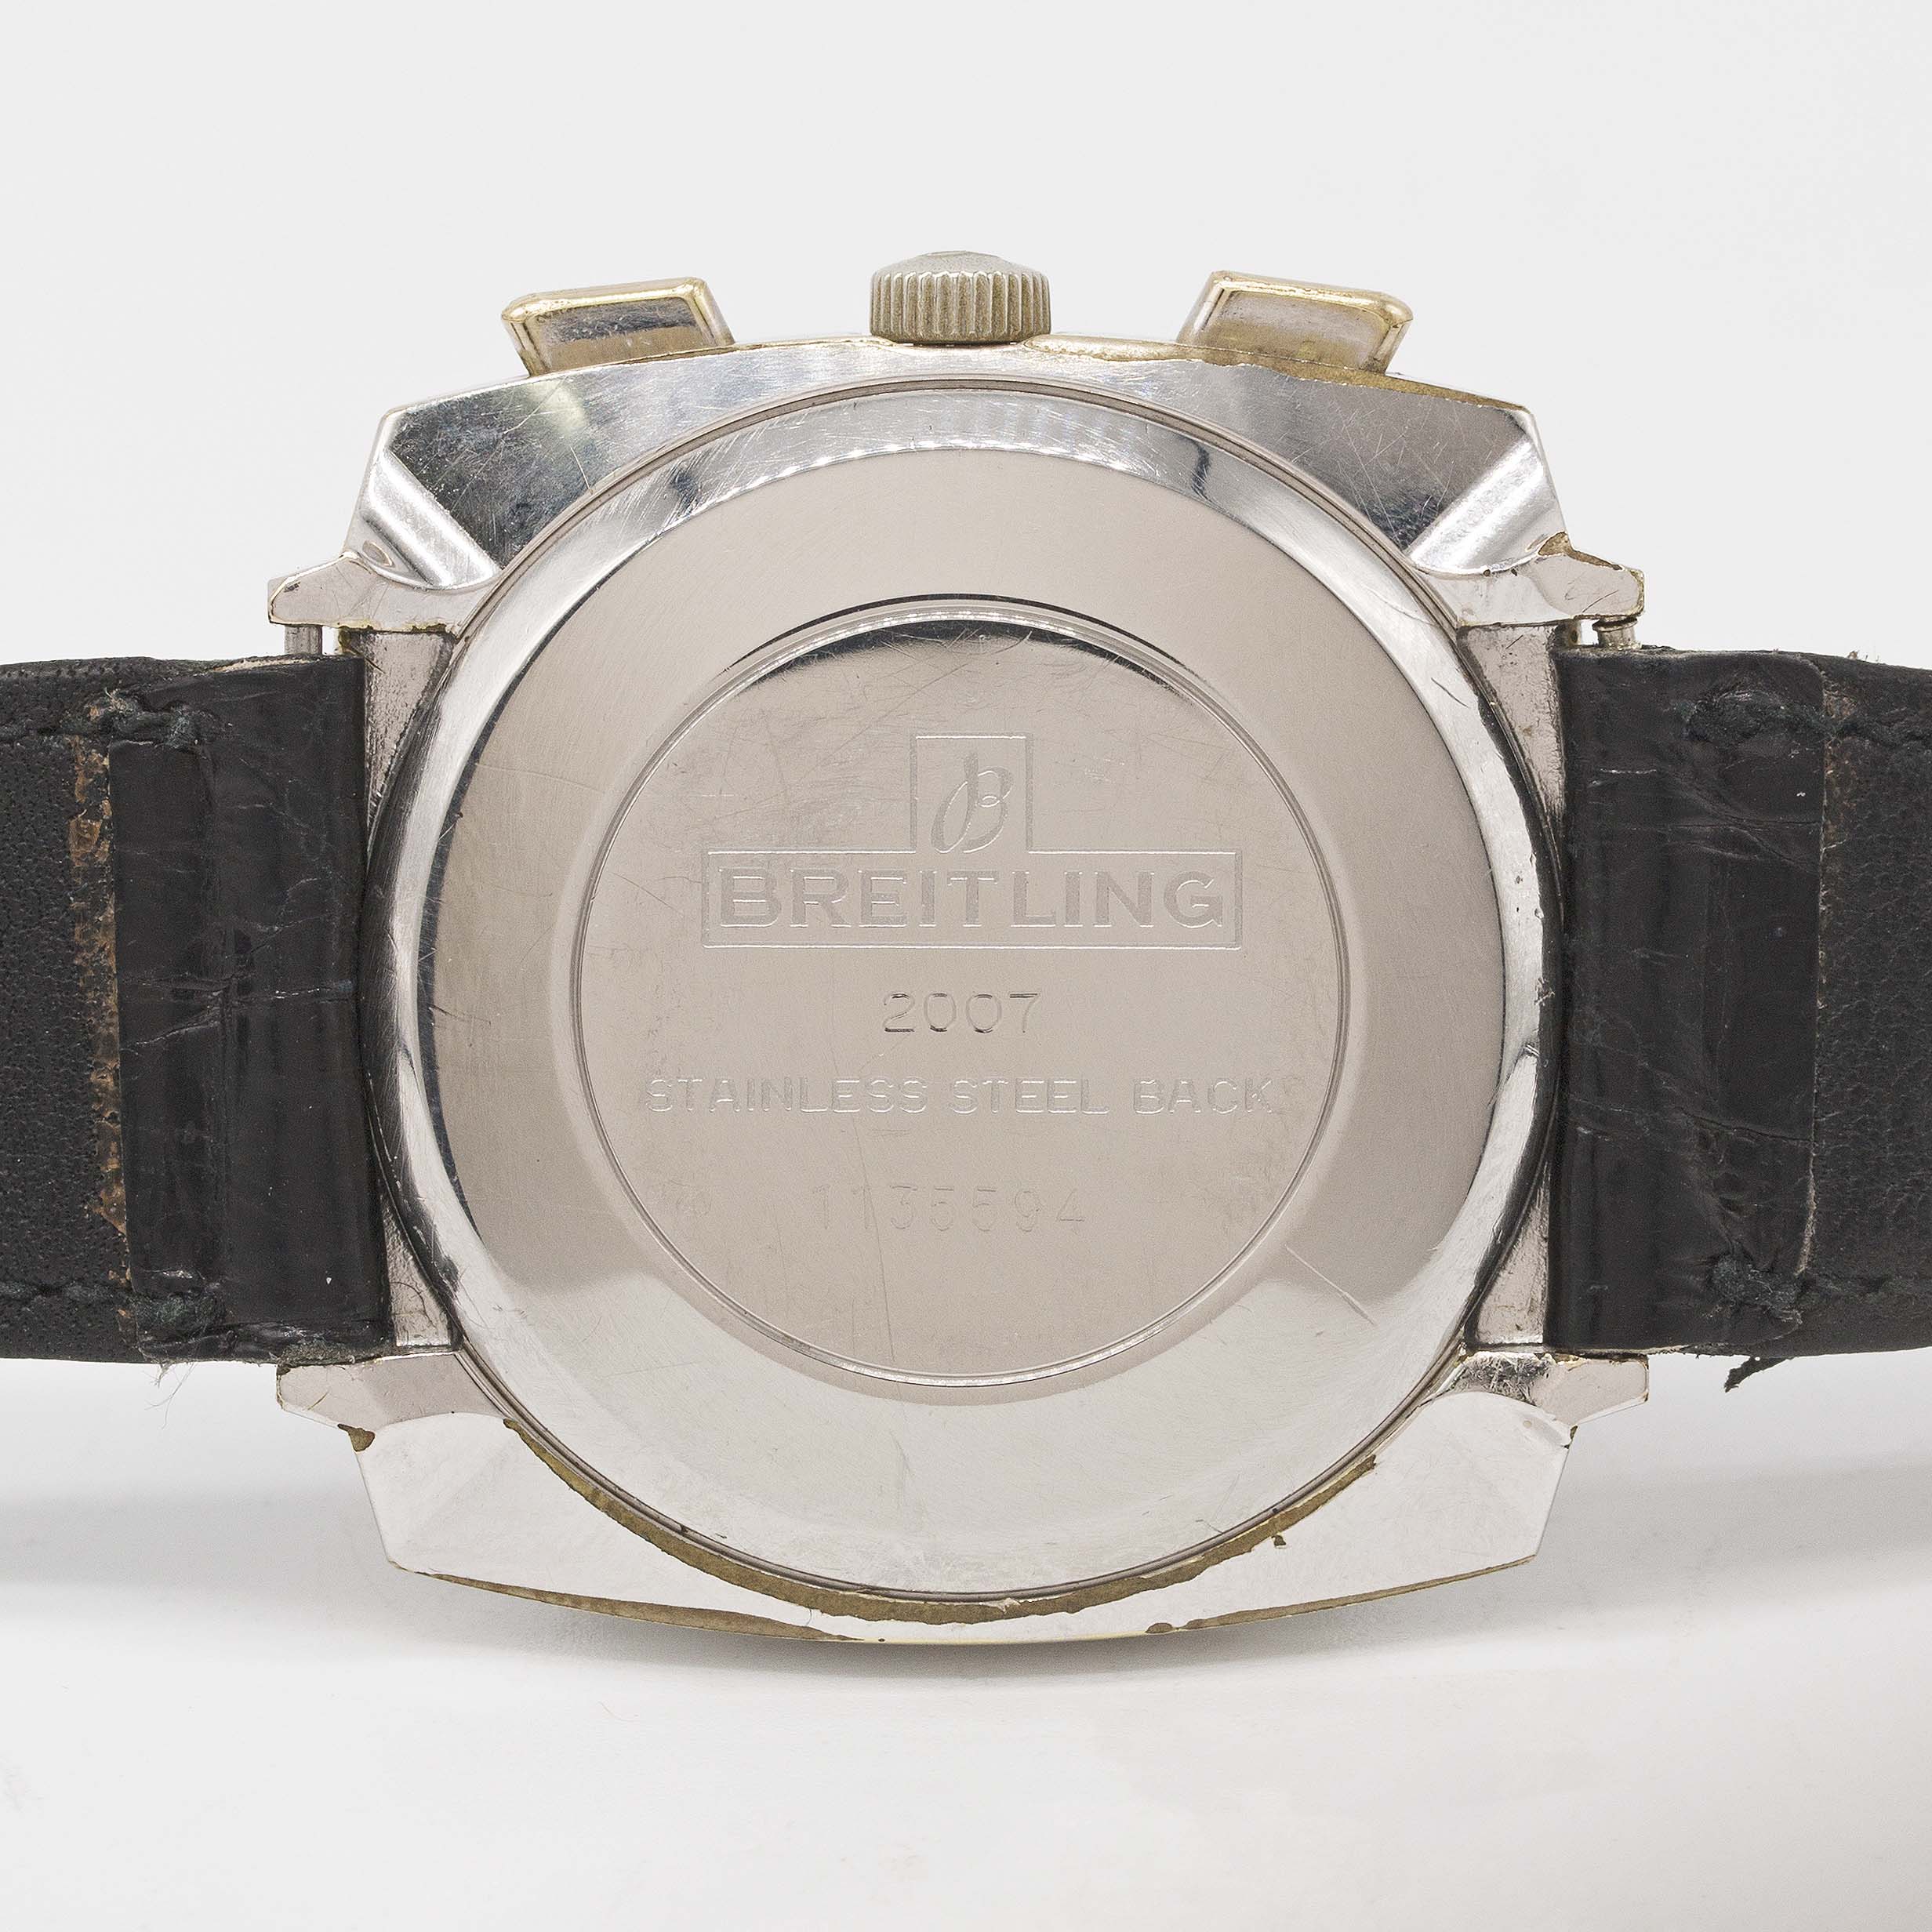 A GENTLEMAN'S BREITLING SPRINT CHRONOGRAPH WRIST WATCH CIRCA 1967, REF. 2007 WITH "BOW TIE" DIAL - Image 3 of 3